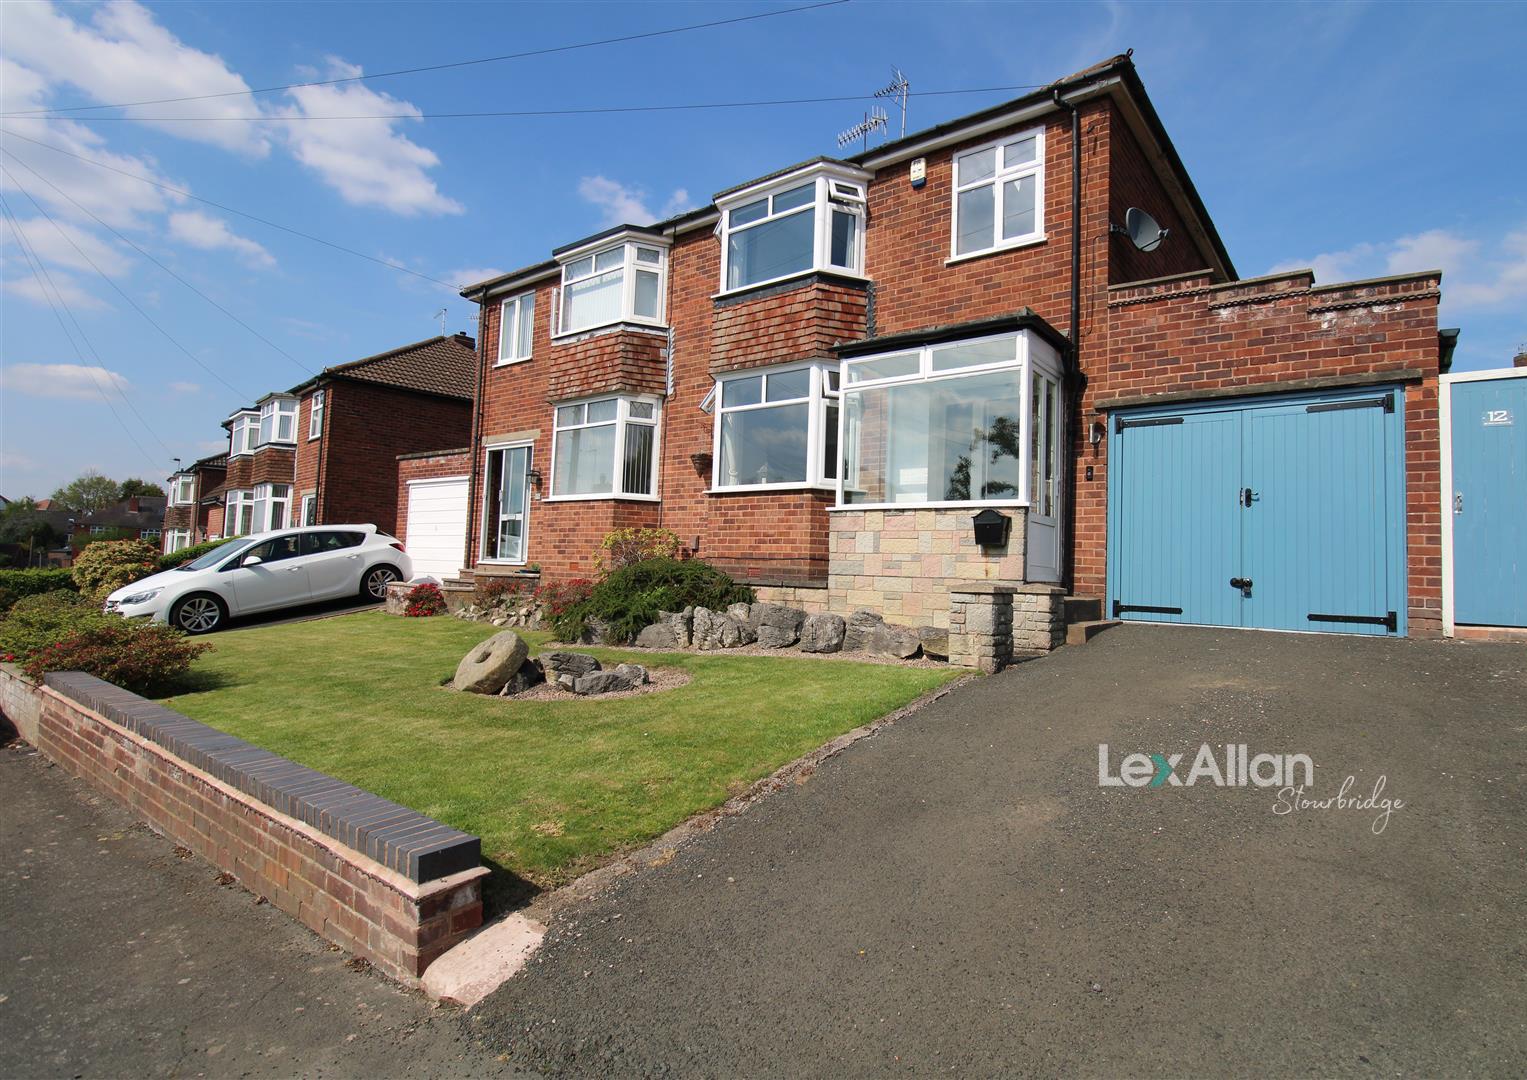 3 bed  for sale in Birchgate, Stourbridge, DY9 